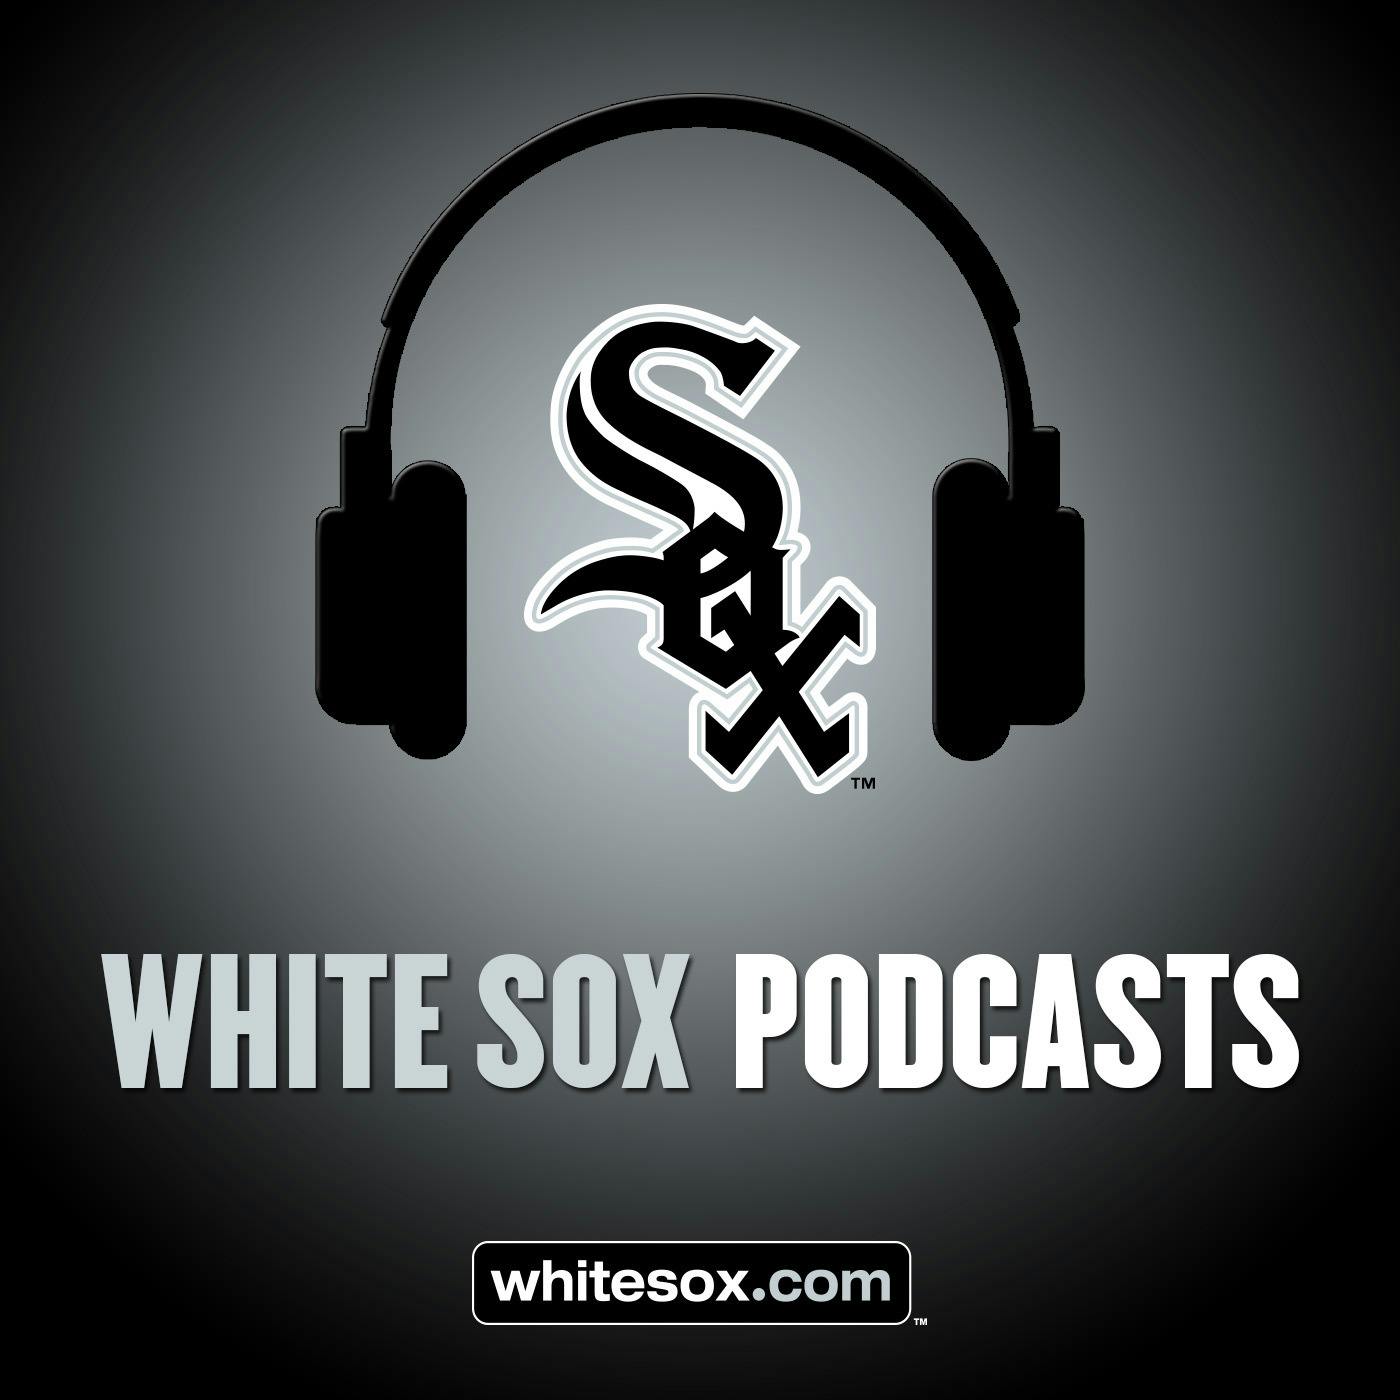 5/18/19: White Sox Weekly